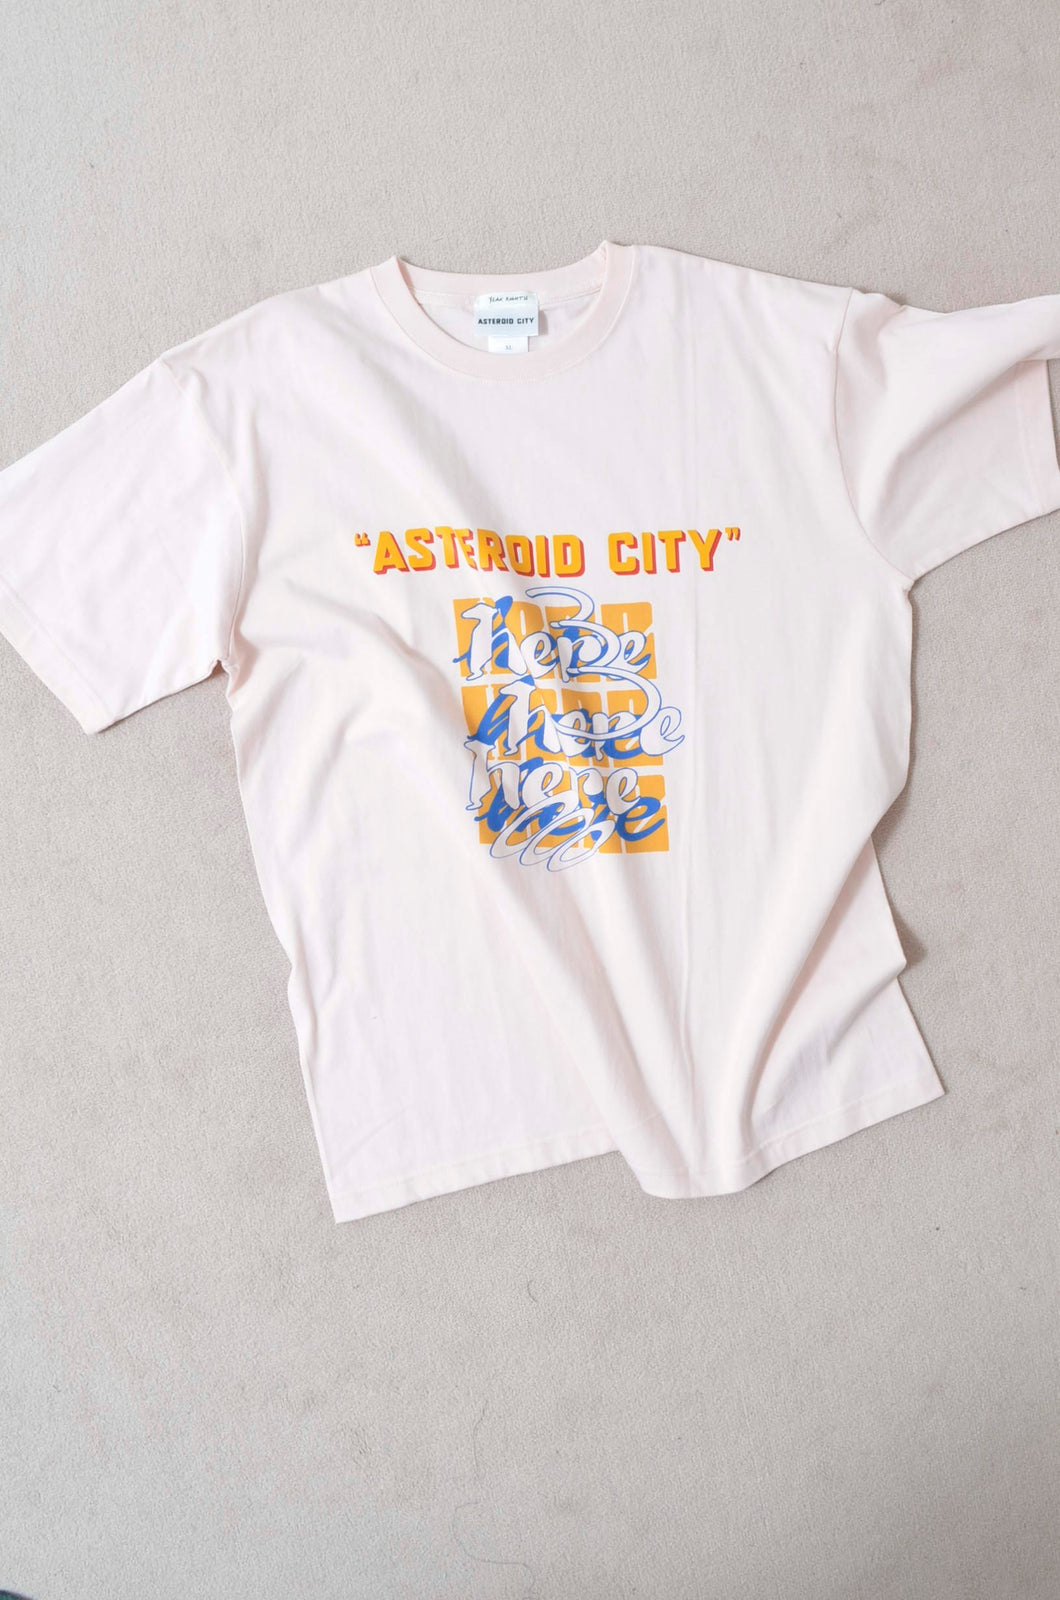 here 3rd Anniversary special T-SHIRTS<ASTEROID CITY>